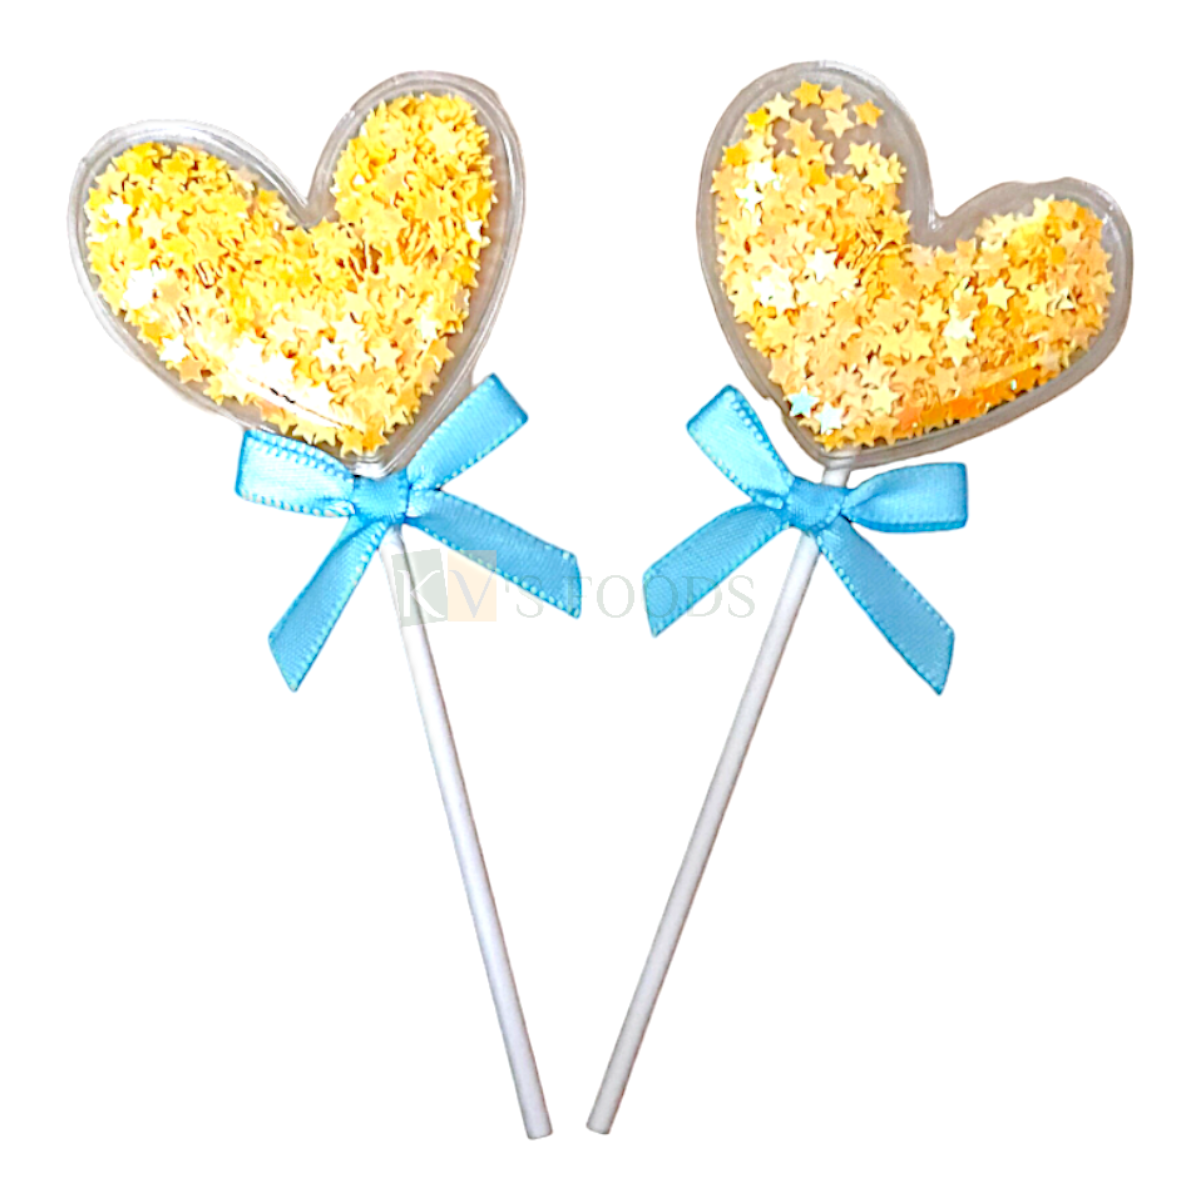 2PC Yellow Colour Shiny Stars Shaped Confetti Filled in Transparent Hearts Blue Satin Lace Knot Cake Topper Kids Happy Birthday Cake Insert Anniversary Love Valentine Celebration DIY Cake Decoration